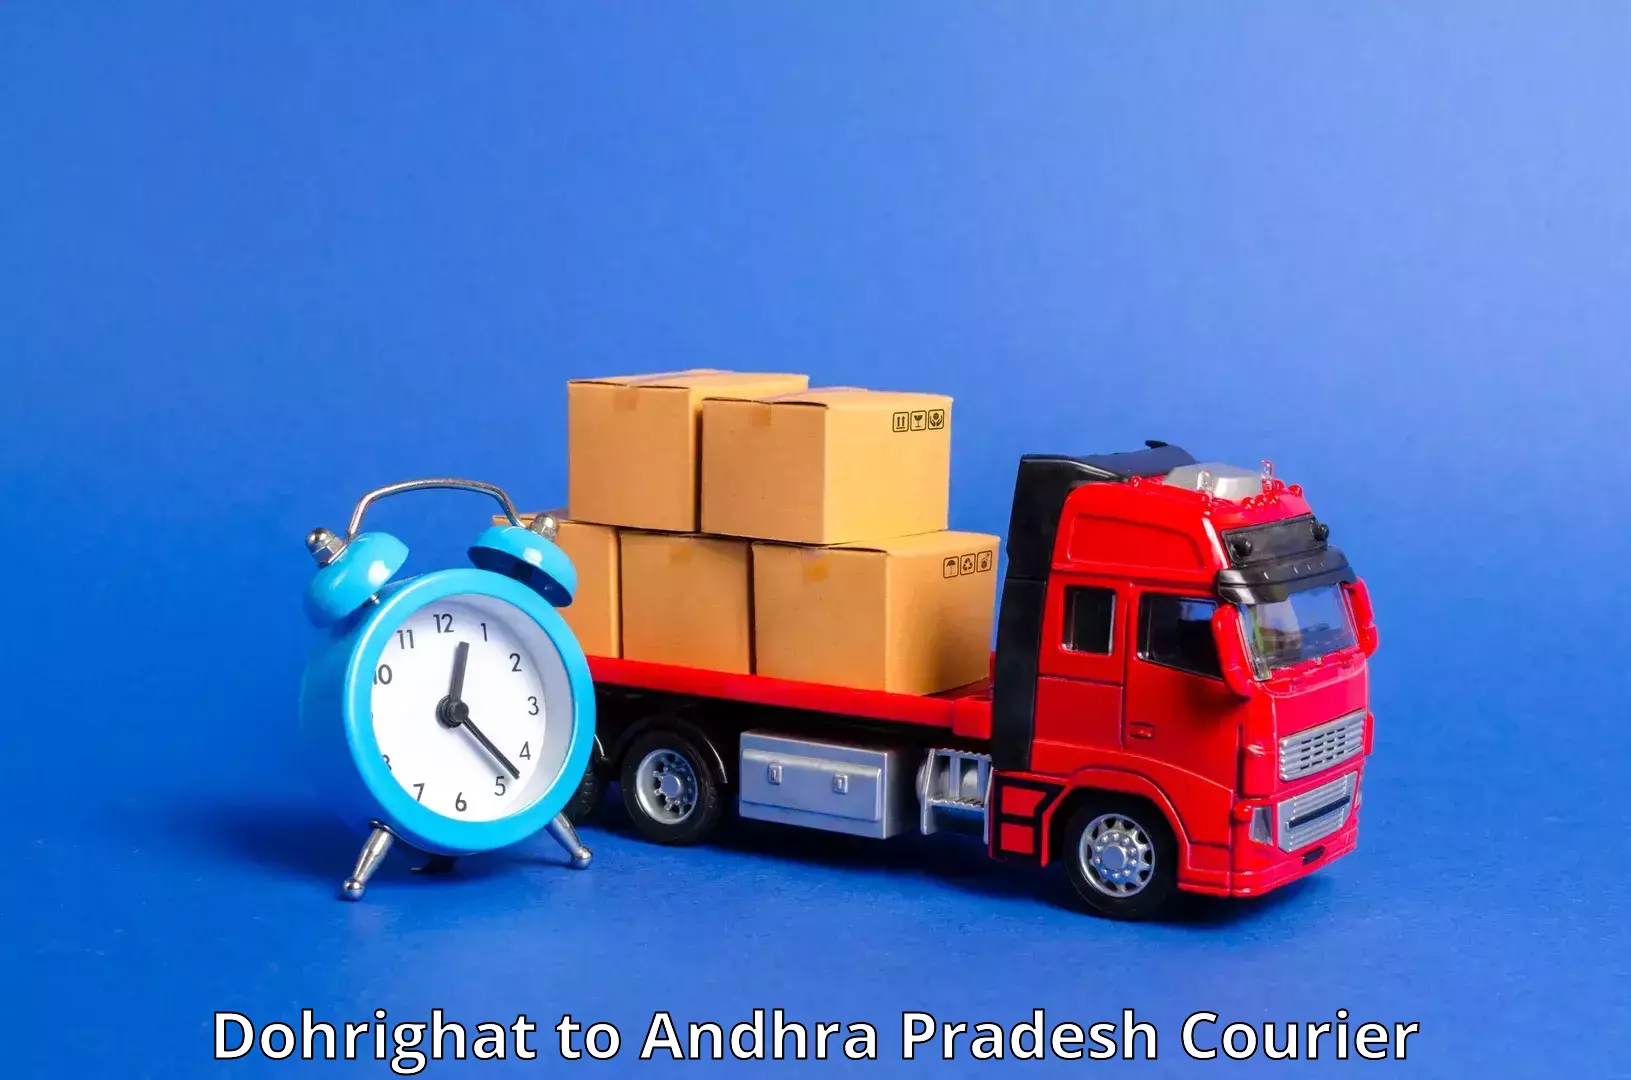 Multi-national courier services Dohrighat to Samalkot